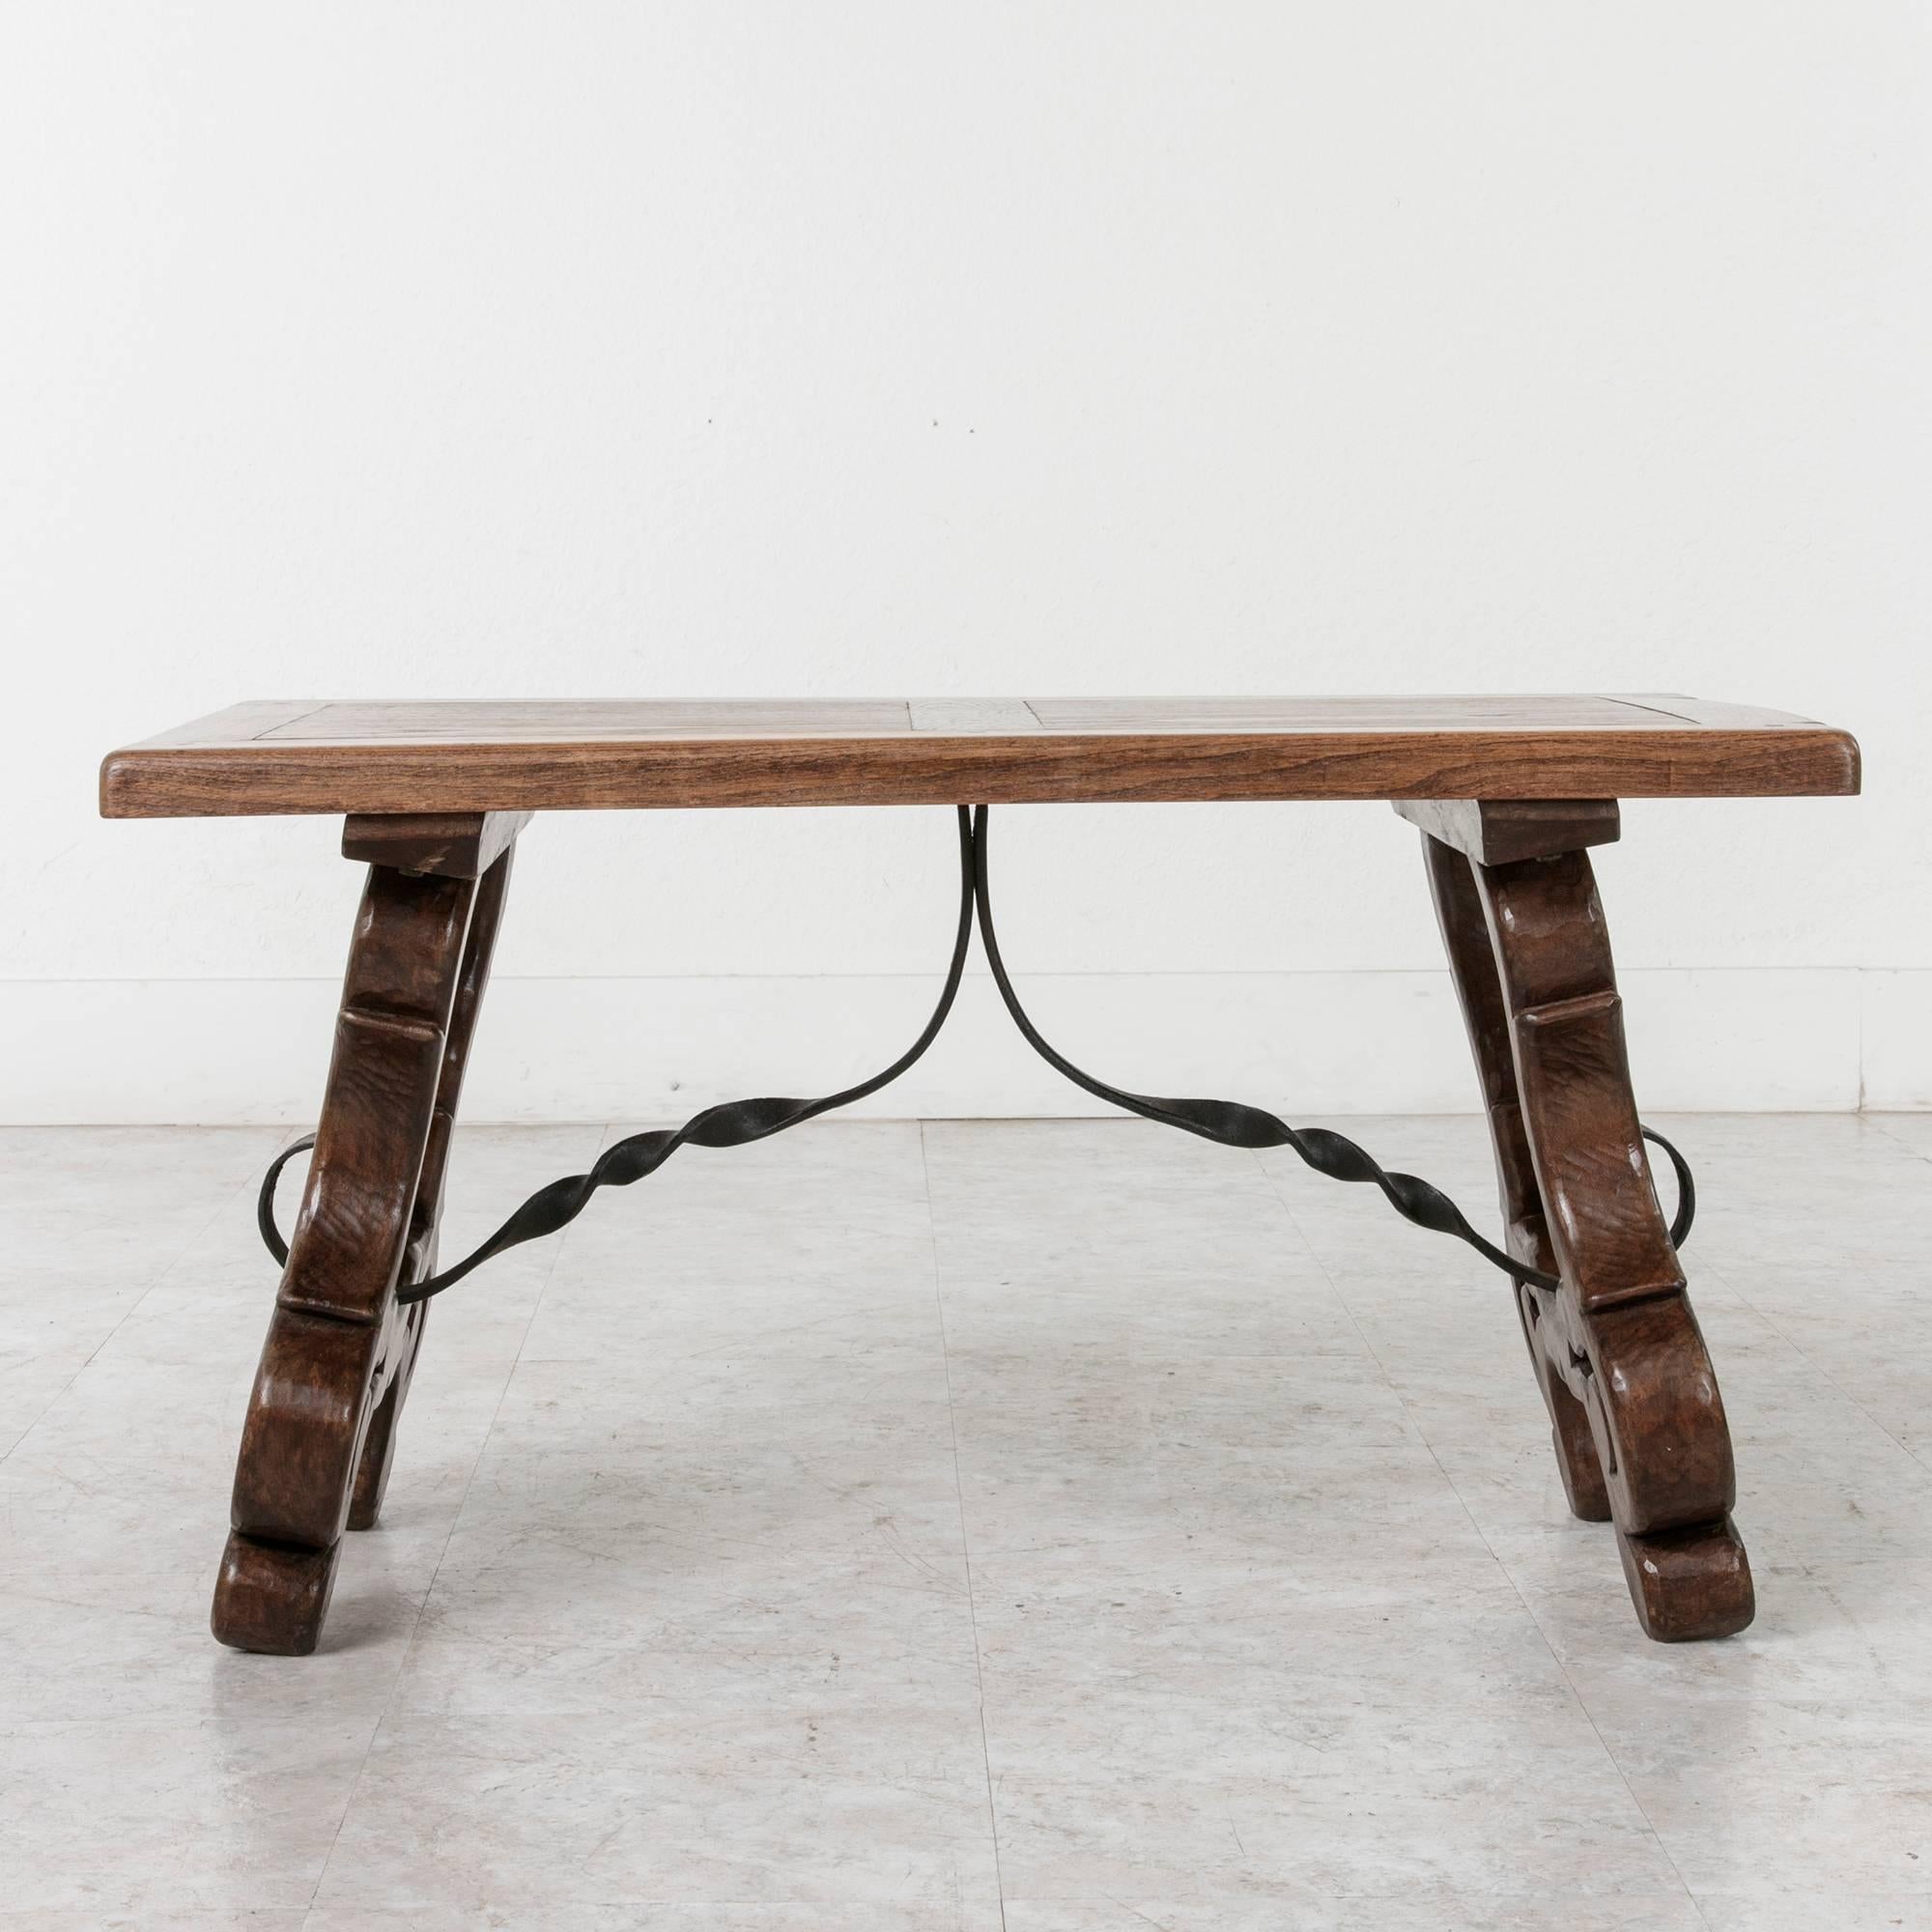 Wrought Iron Early 20th Century Spanish Style Oak Coffee Table or Bench with Iron Stretcher